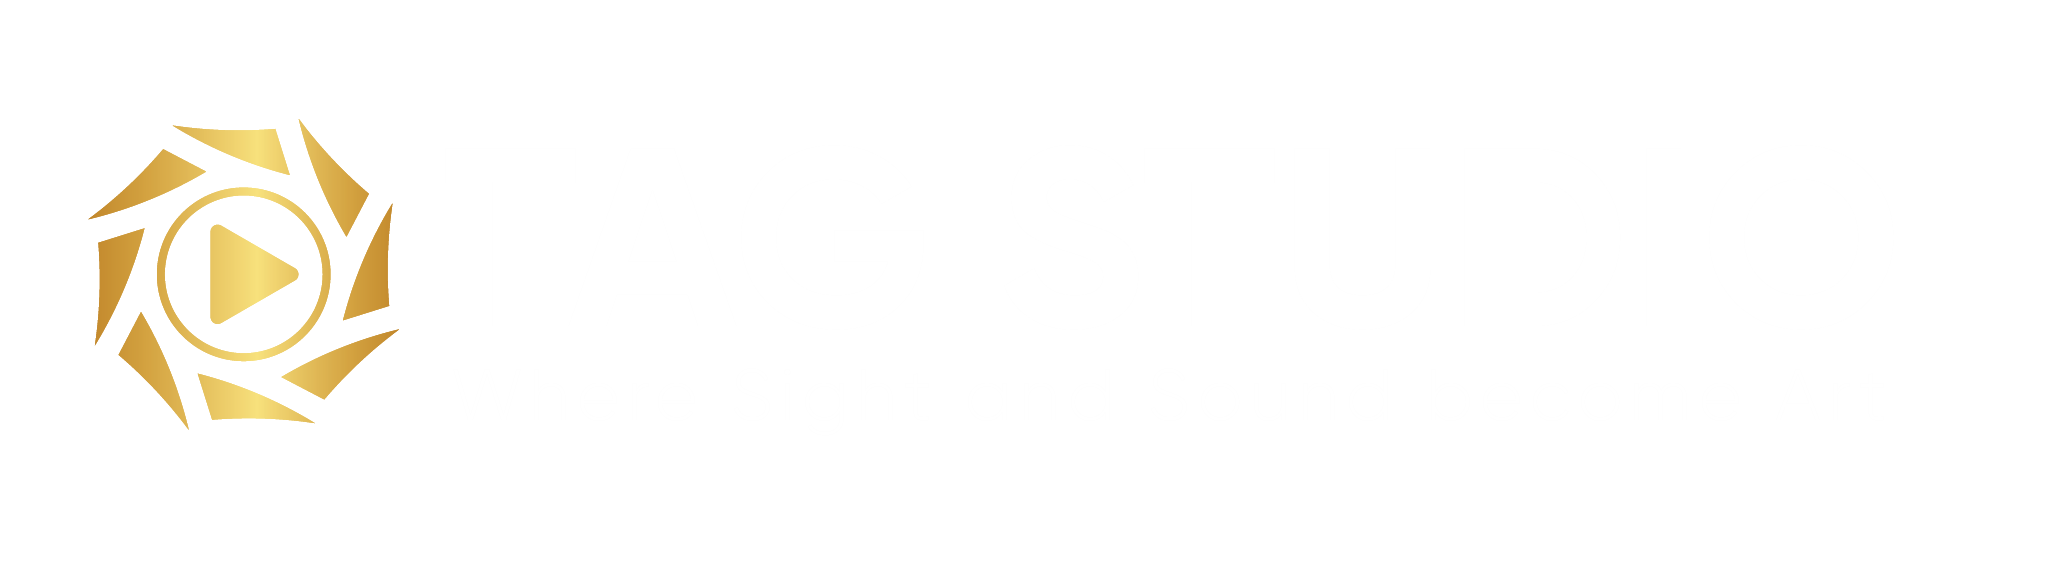 Tag Studio - TAG Studio is a full service, video and media production company.